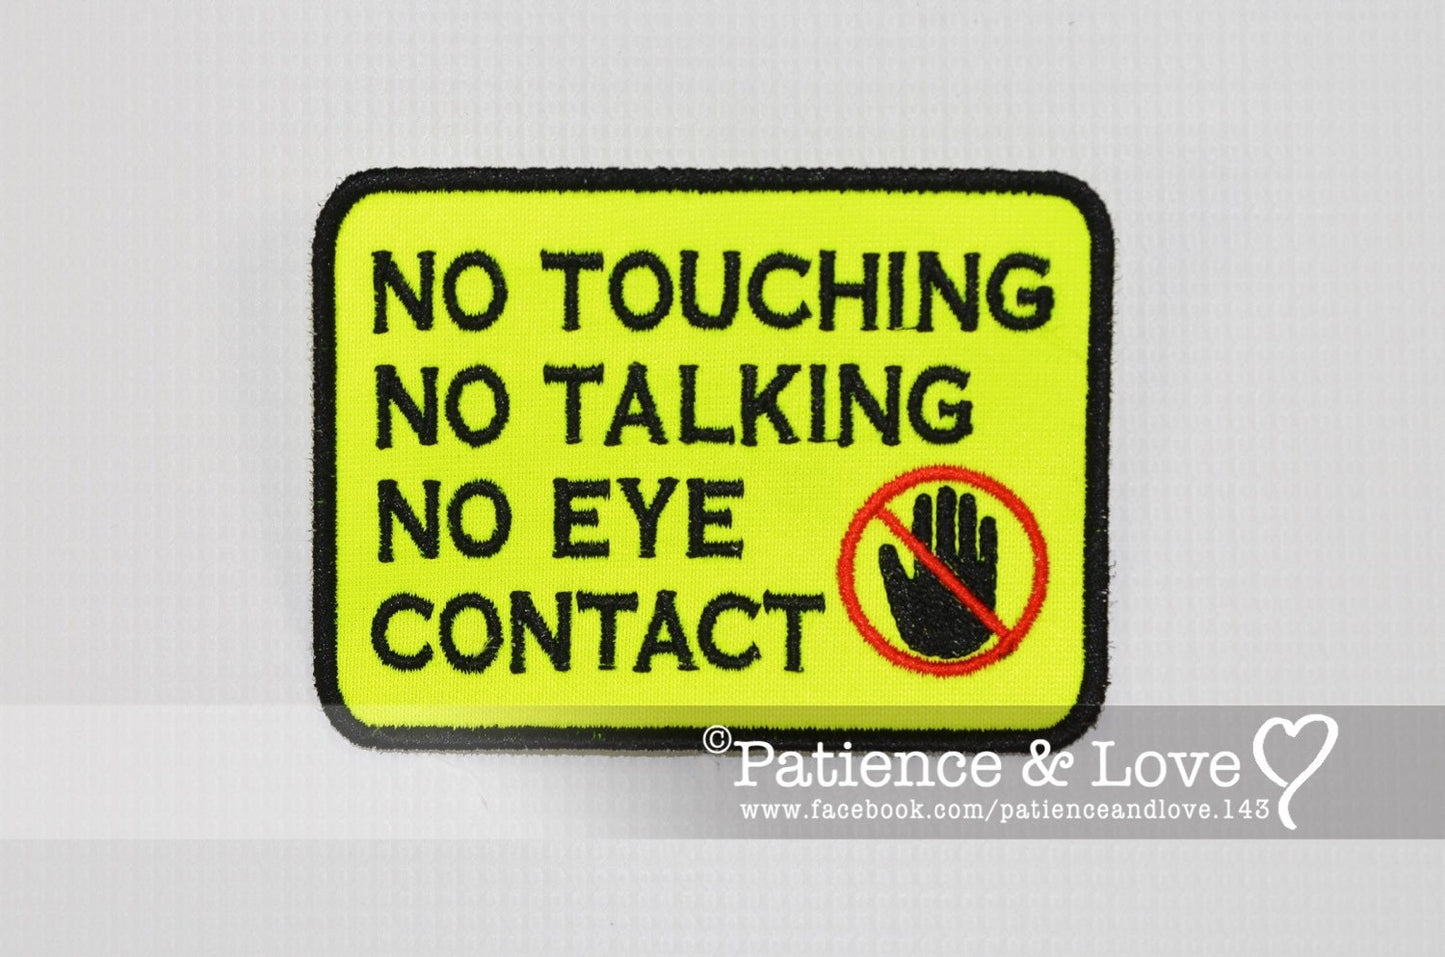 No Touching - No Talking - No Eye contact with hand, 4" x 3" embroidered patch